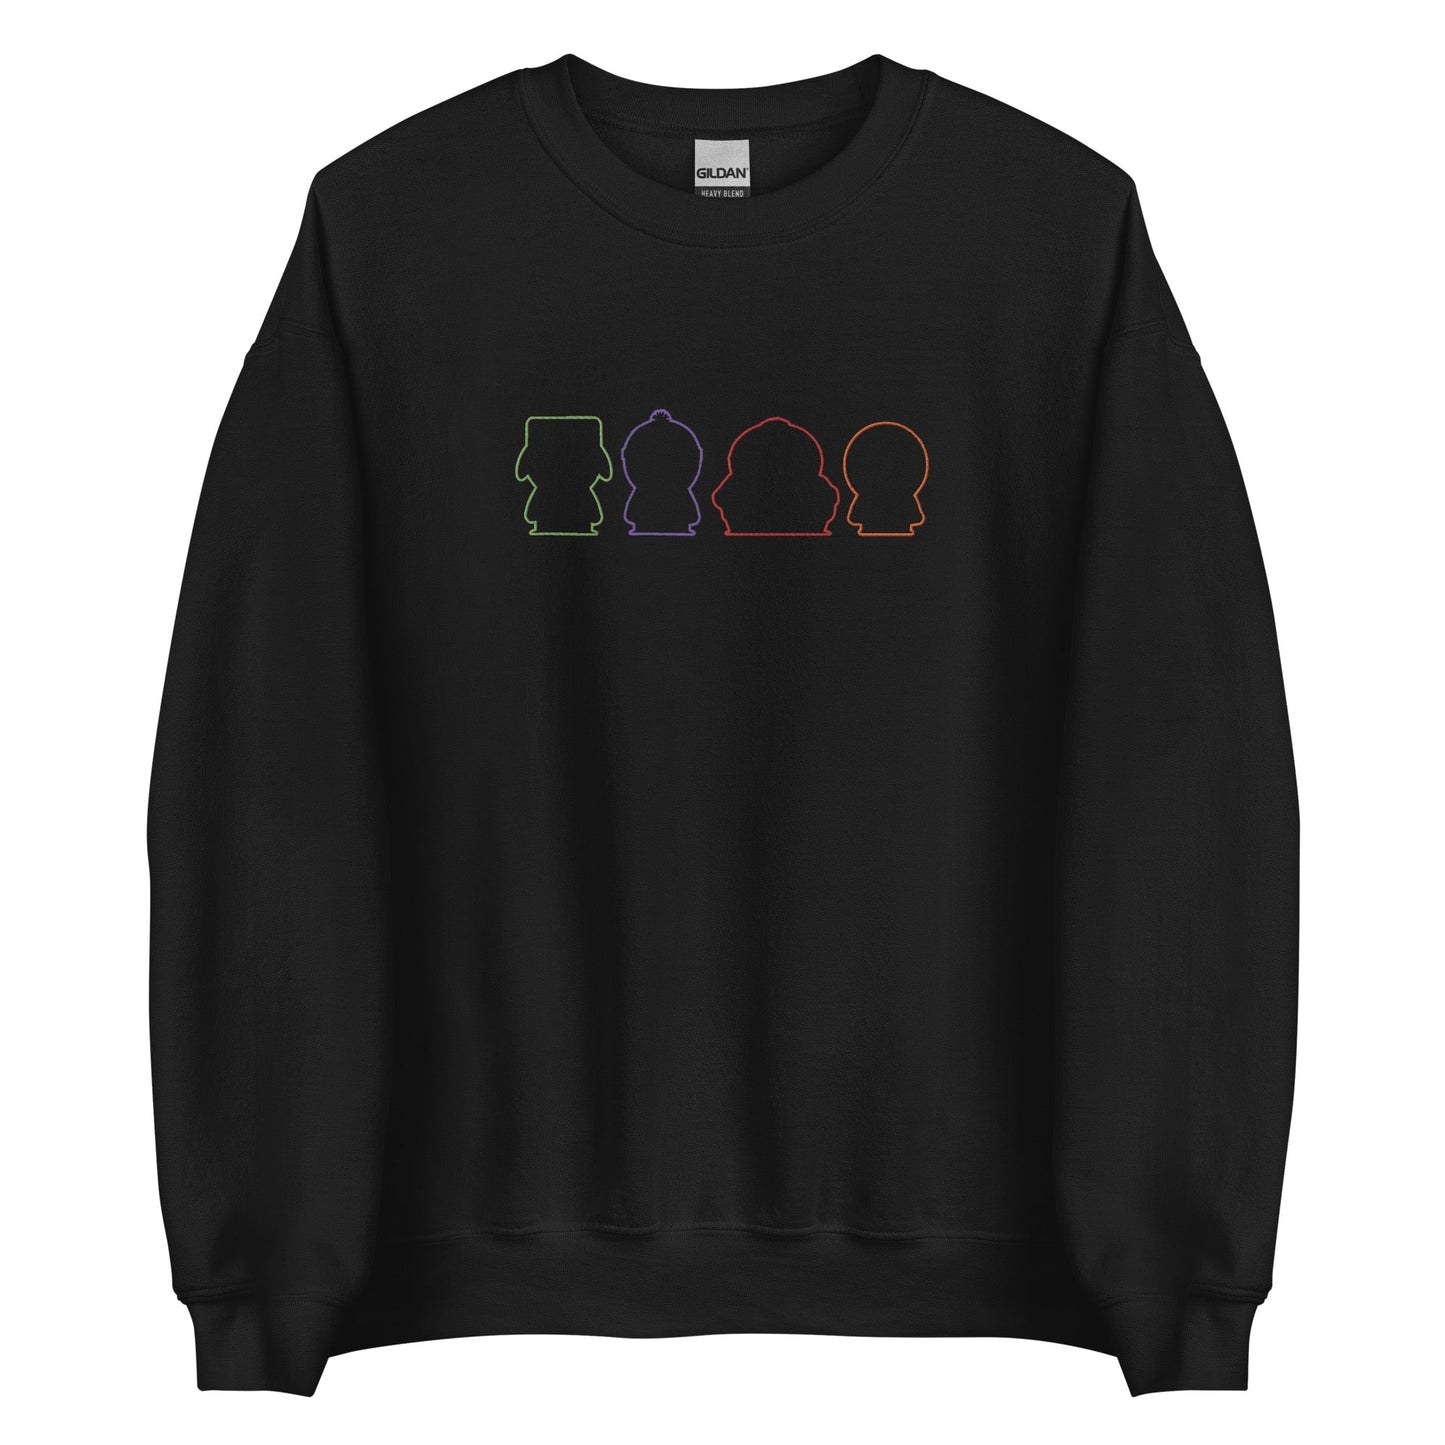 South Park Embroidered Boys Silhouettes Crewneck - Paramount Shop